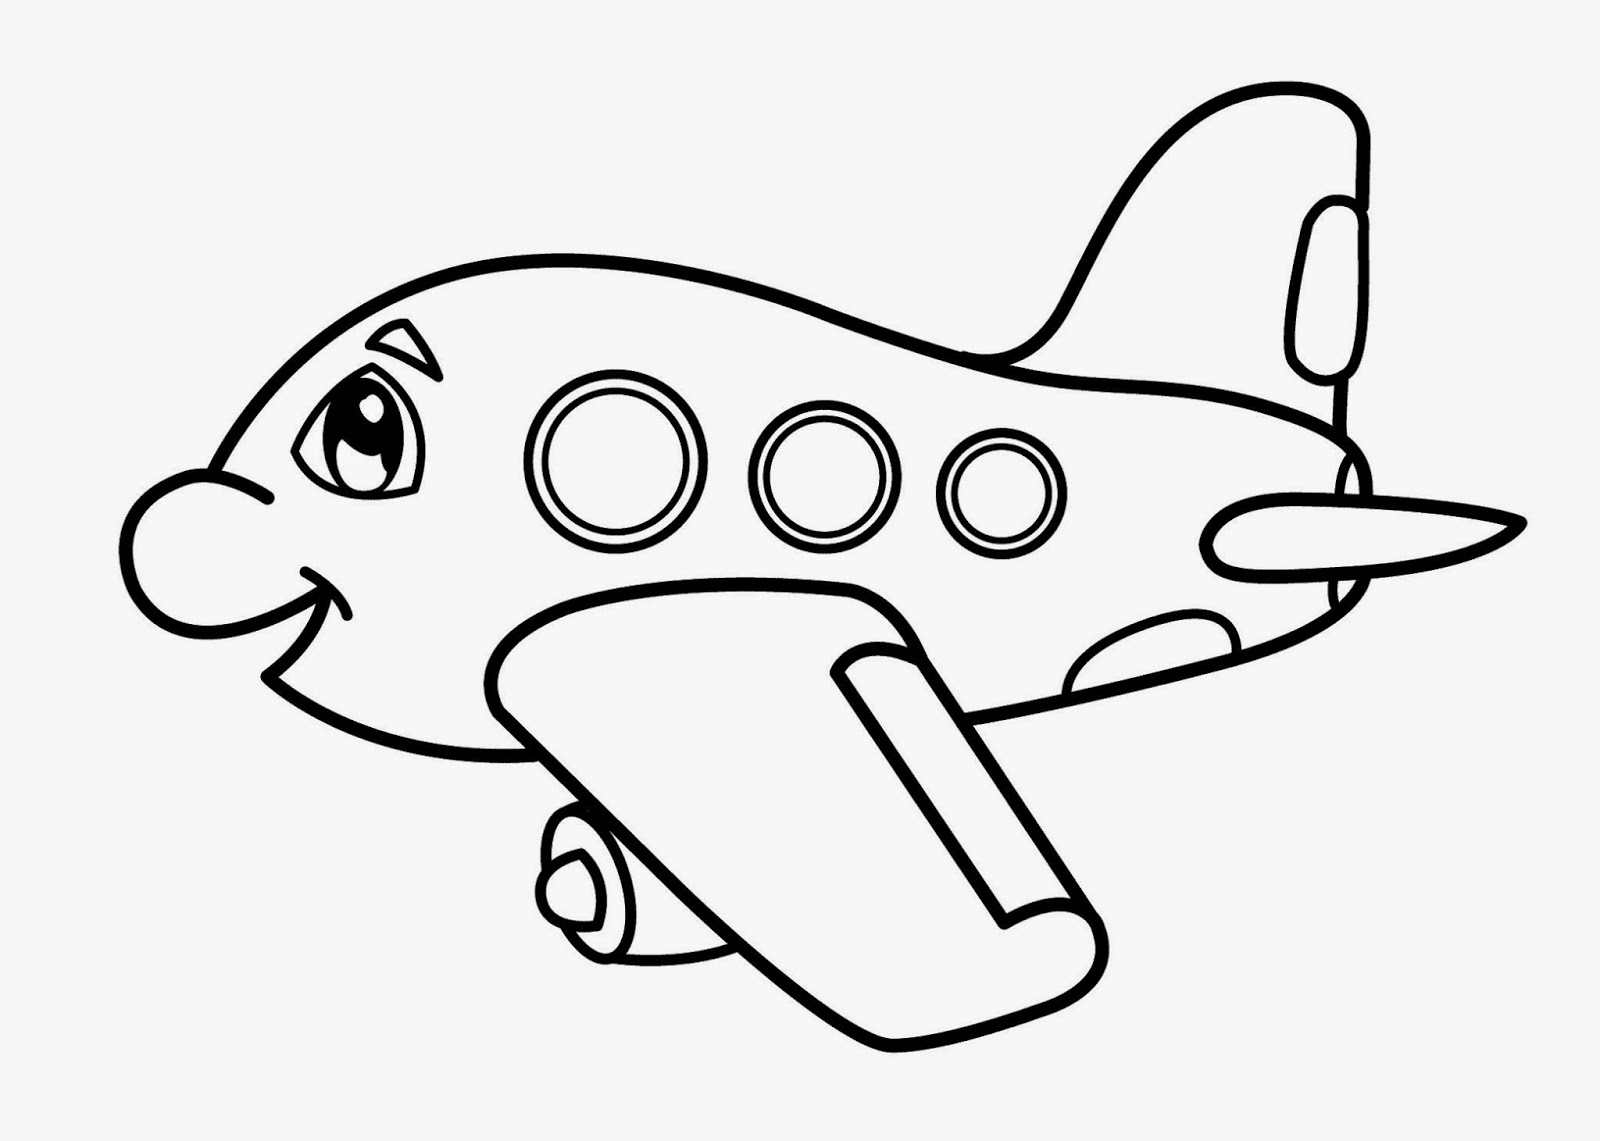 7 Best Images Of Airplane Letter A Worksheets Letter 